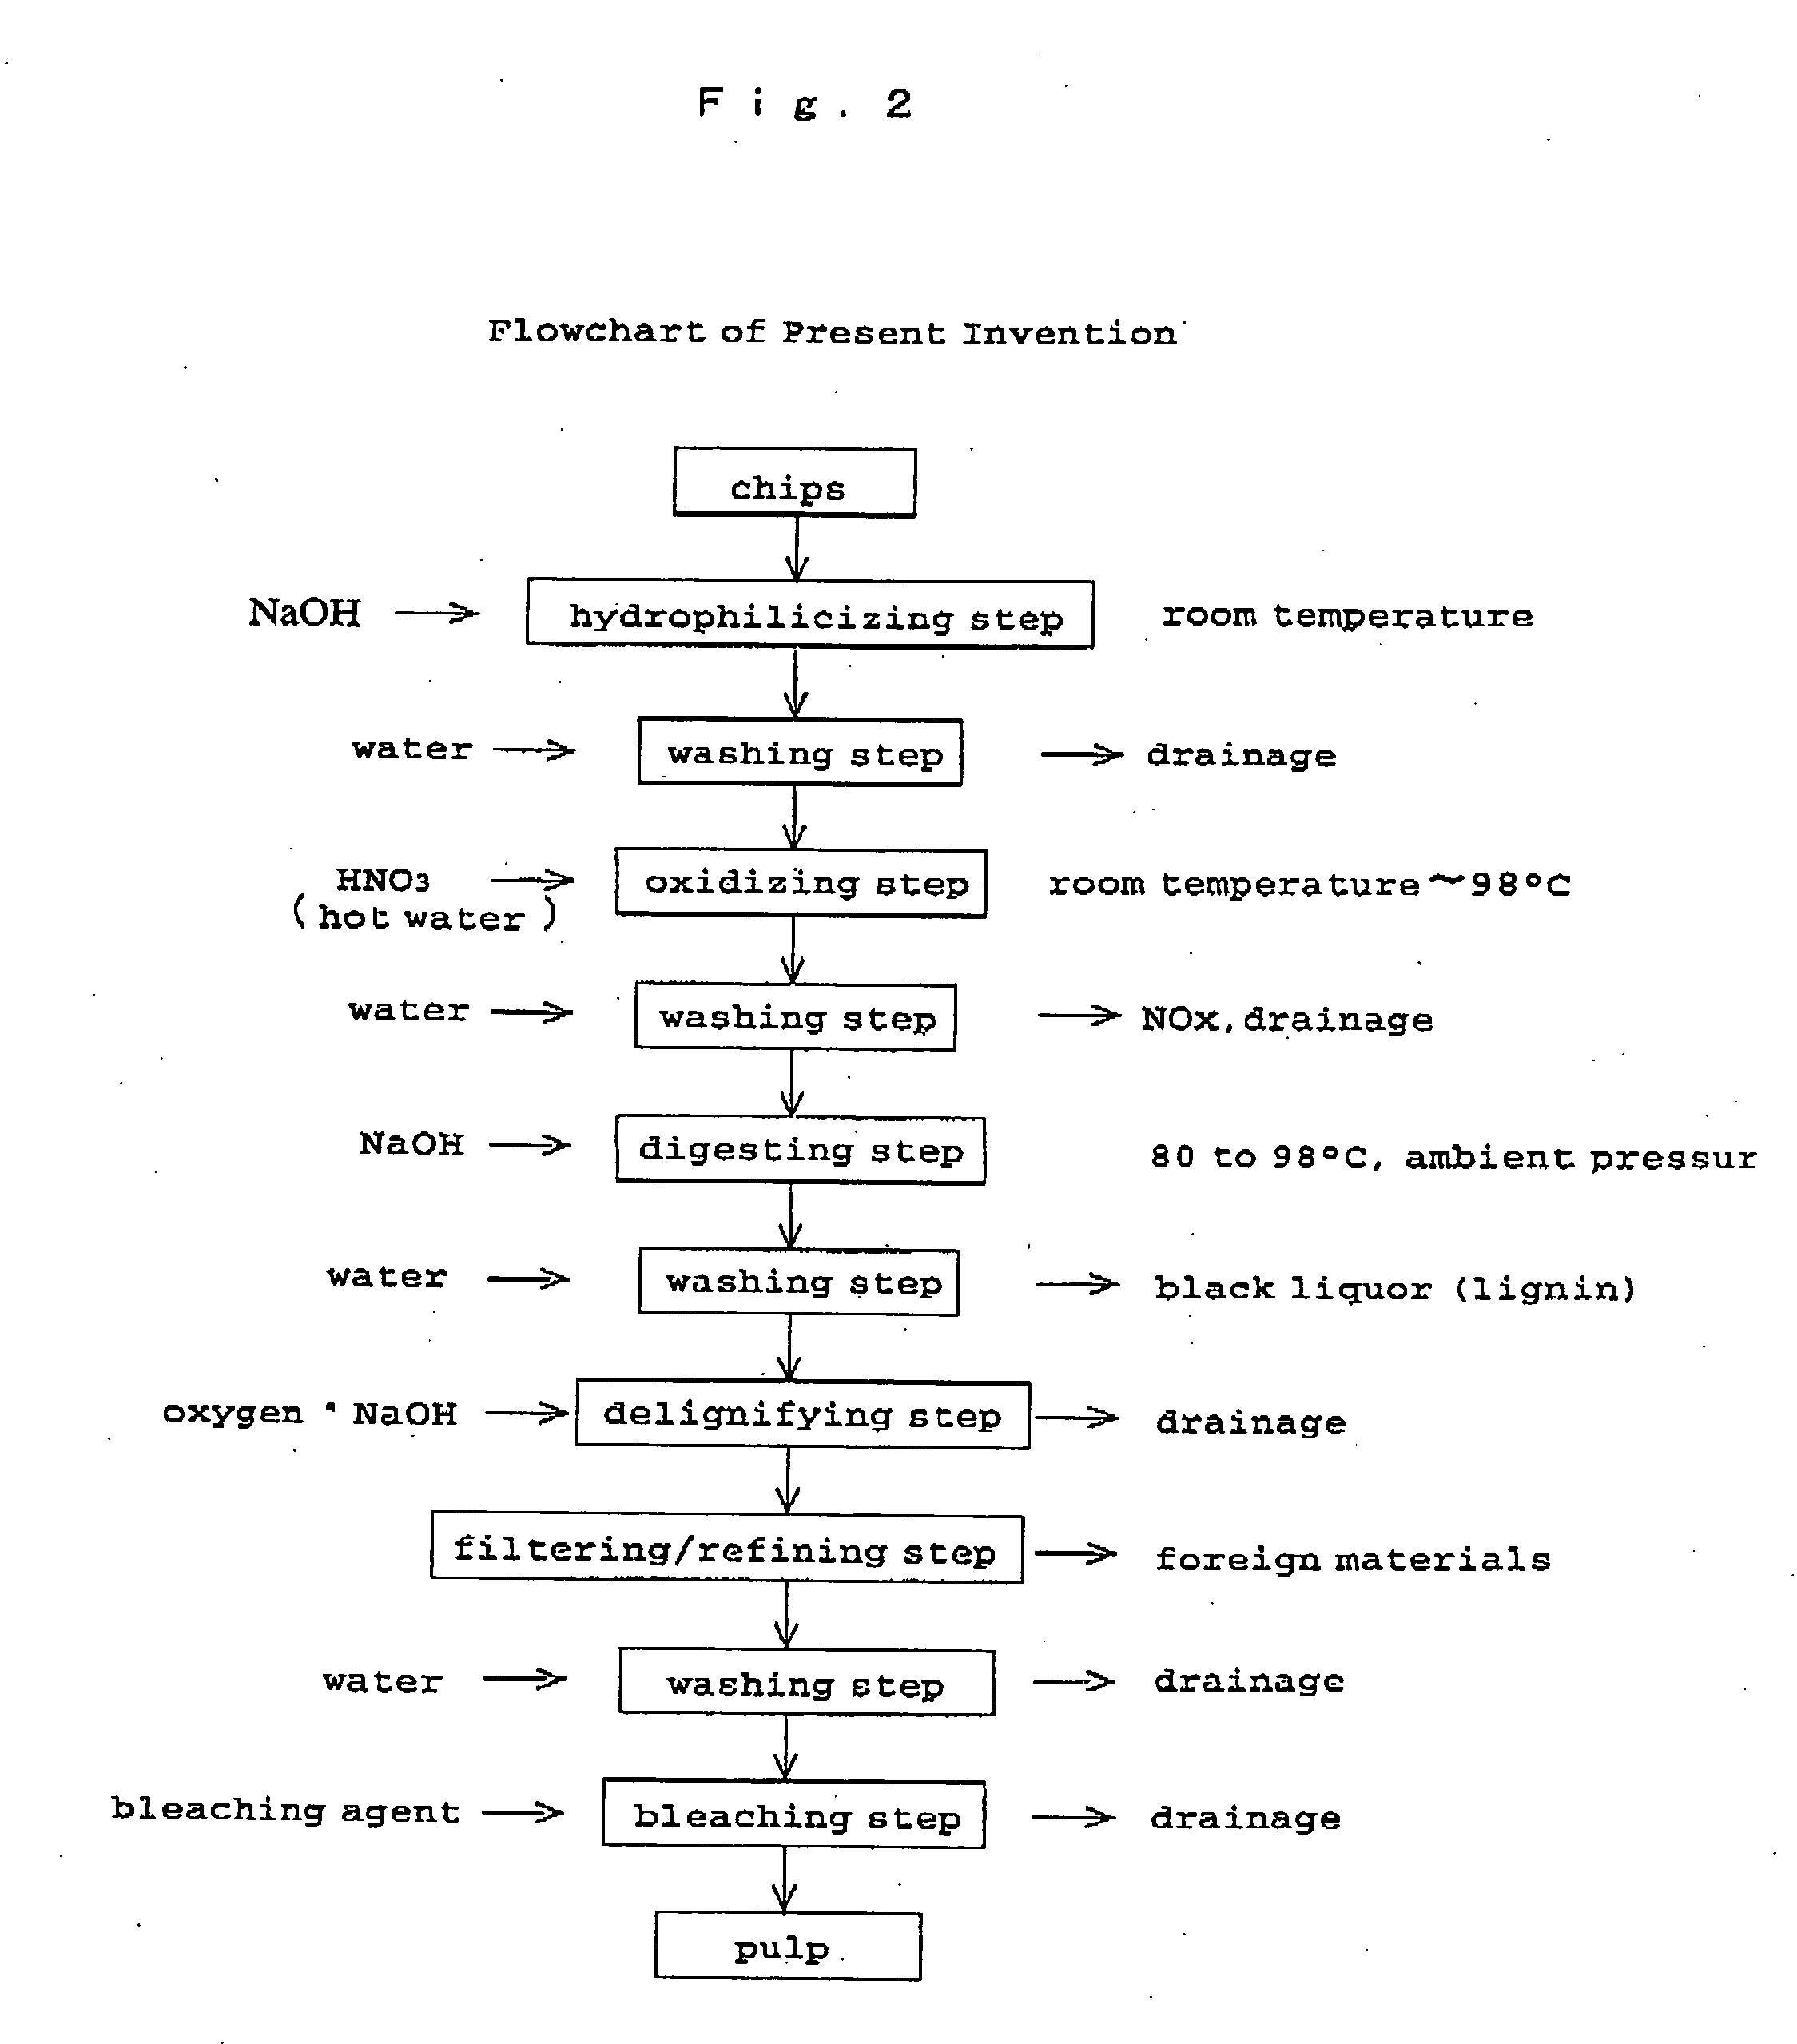 Method for production of pulp